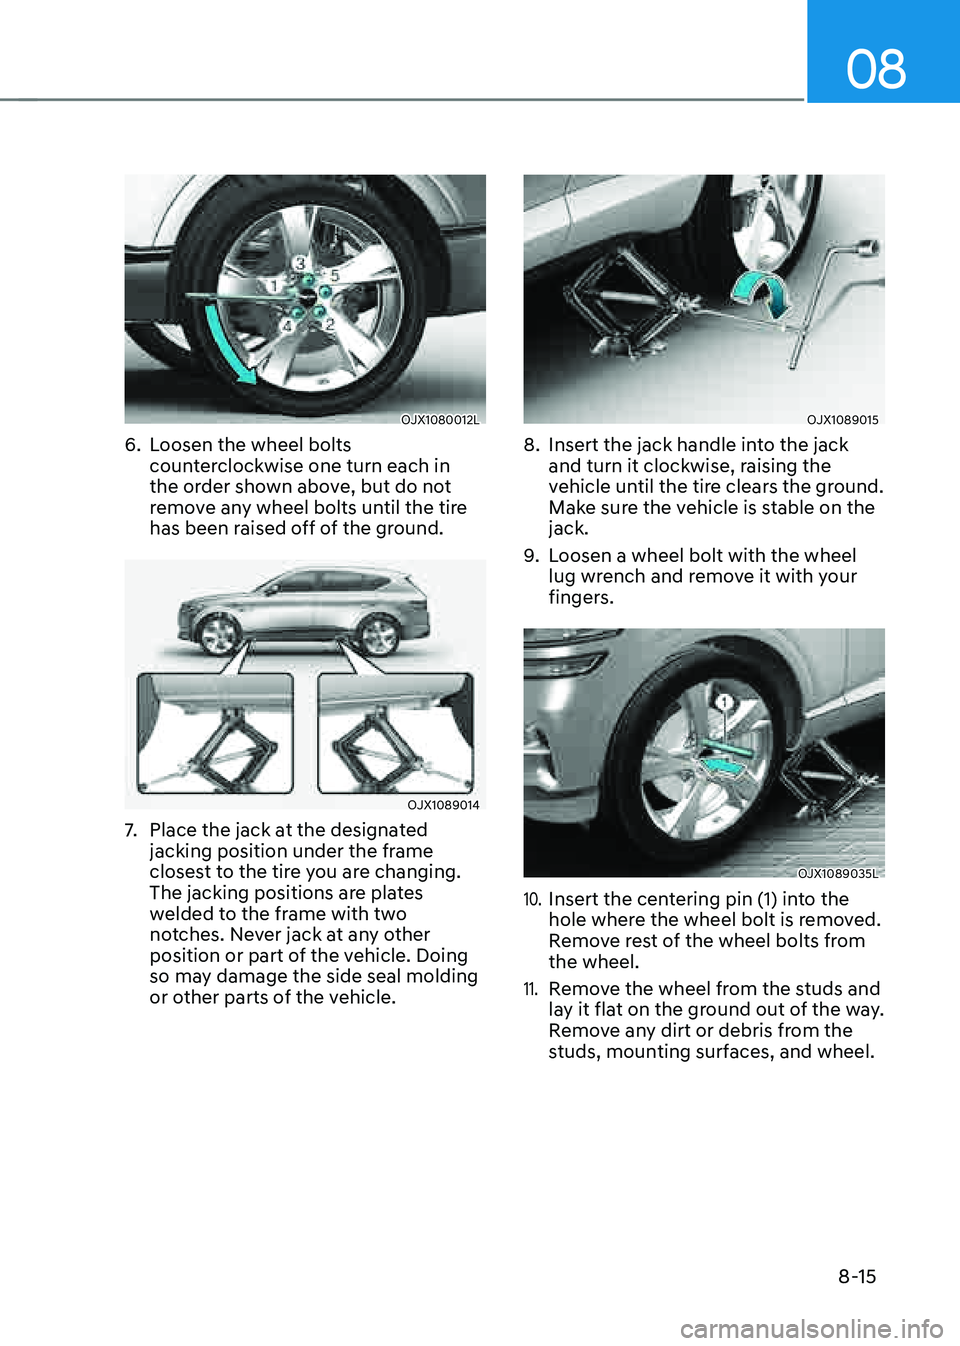 GENESIS GV80 2021  Owners Manual 08
8-15
OJX1080012LOJX1080012L
6. Loosen the wheel bolts 
counterclockwise one turn each in 
the order shown above, but do not 
remove any wheel bolts until the tire 
has been raised off of the ground